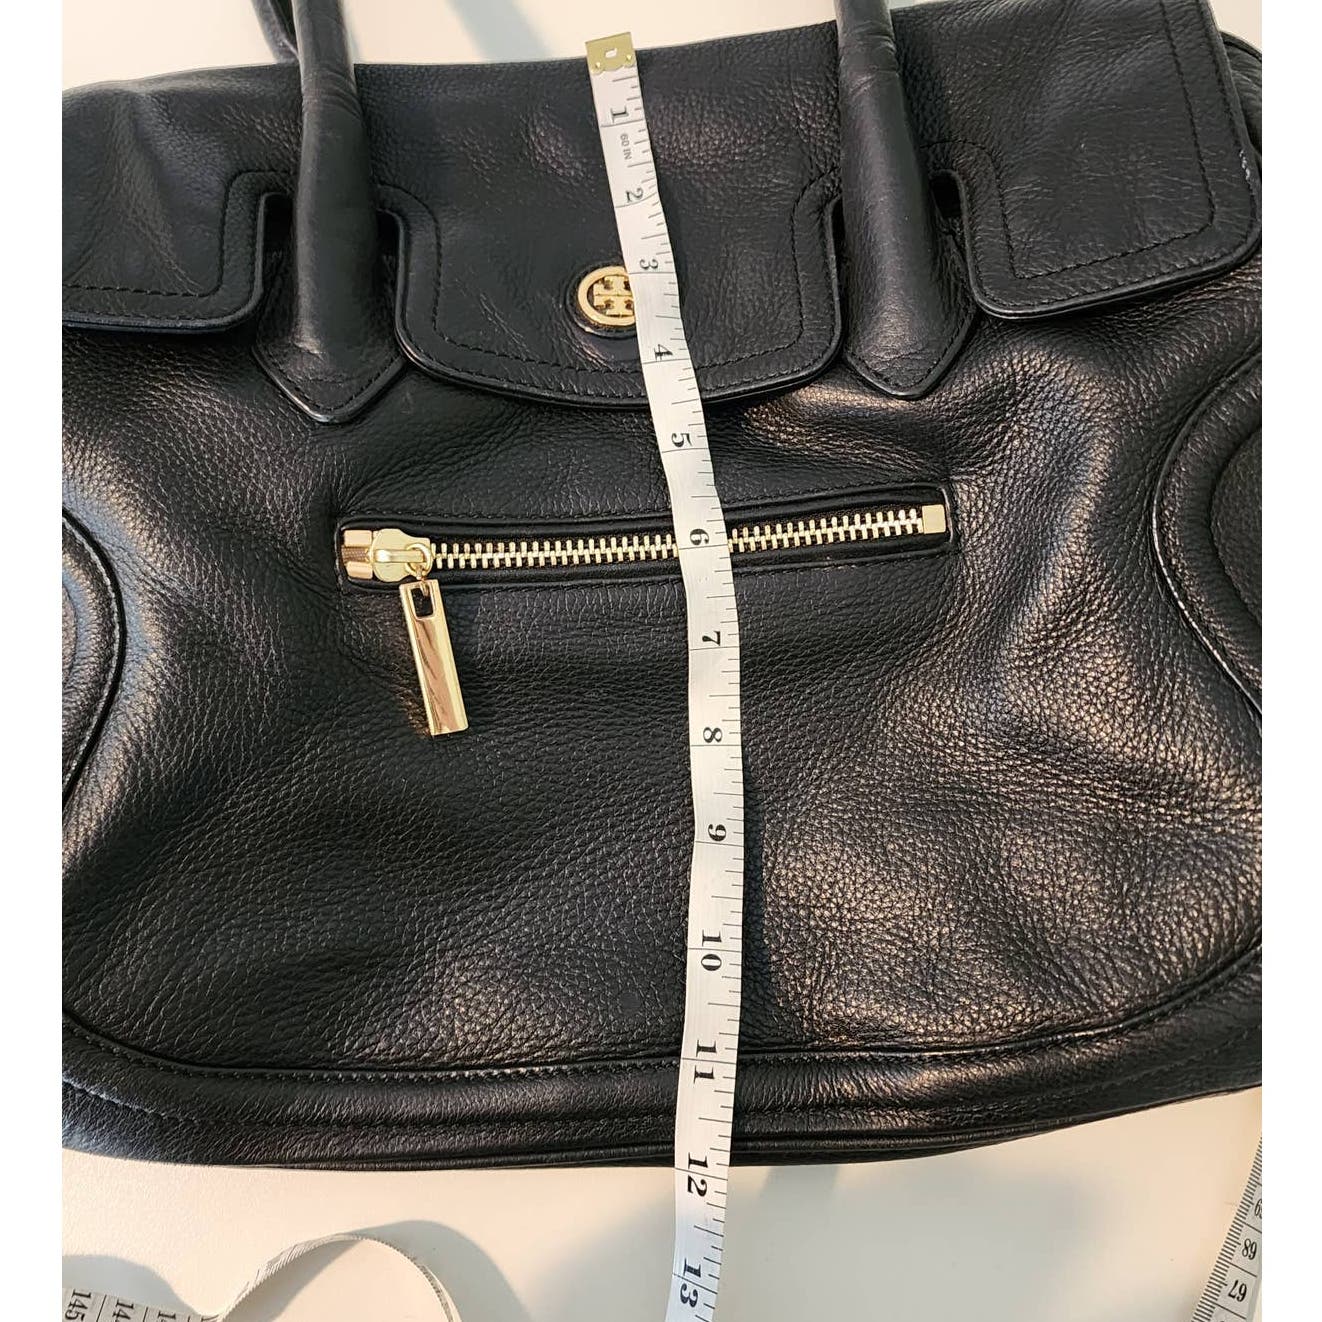 Tory Burch Black Leather Satchel Tote